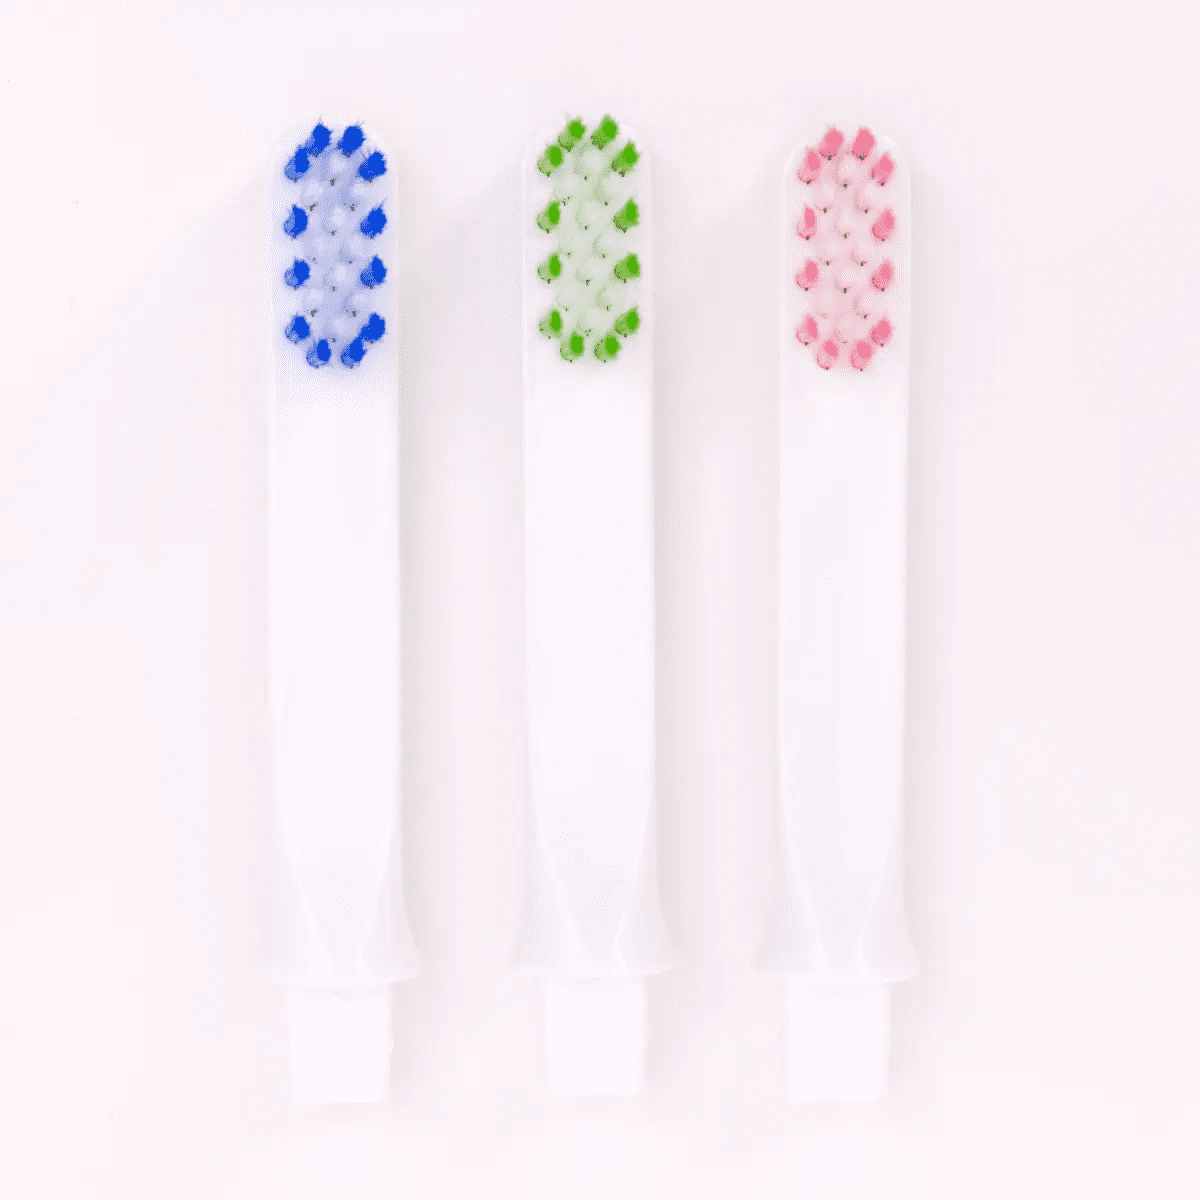 Three differently colored replacement toothbrushes on a white background